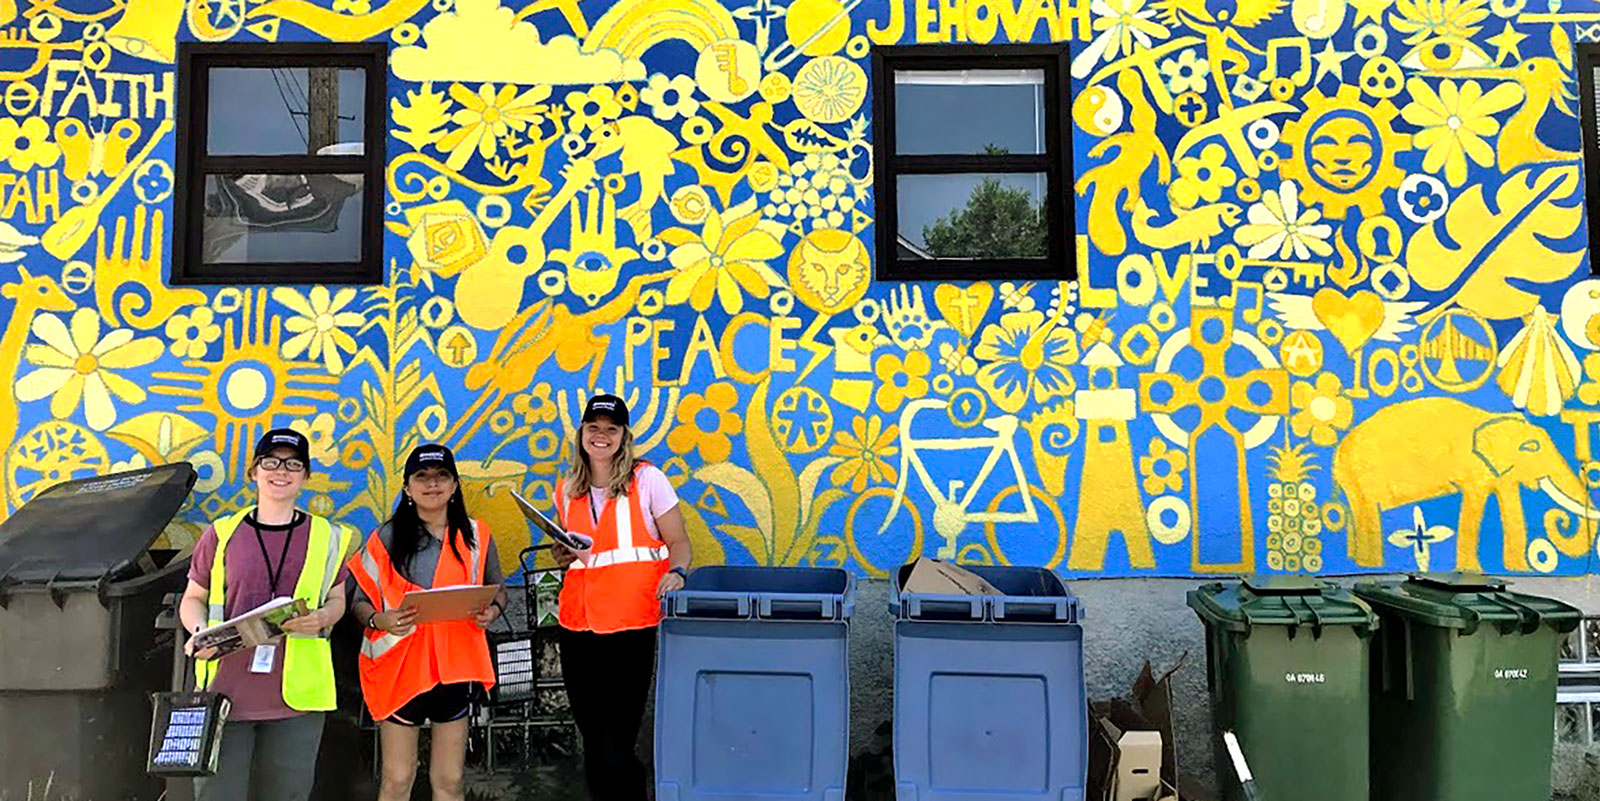 City interns standing by mural and recycling containers